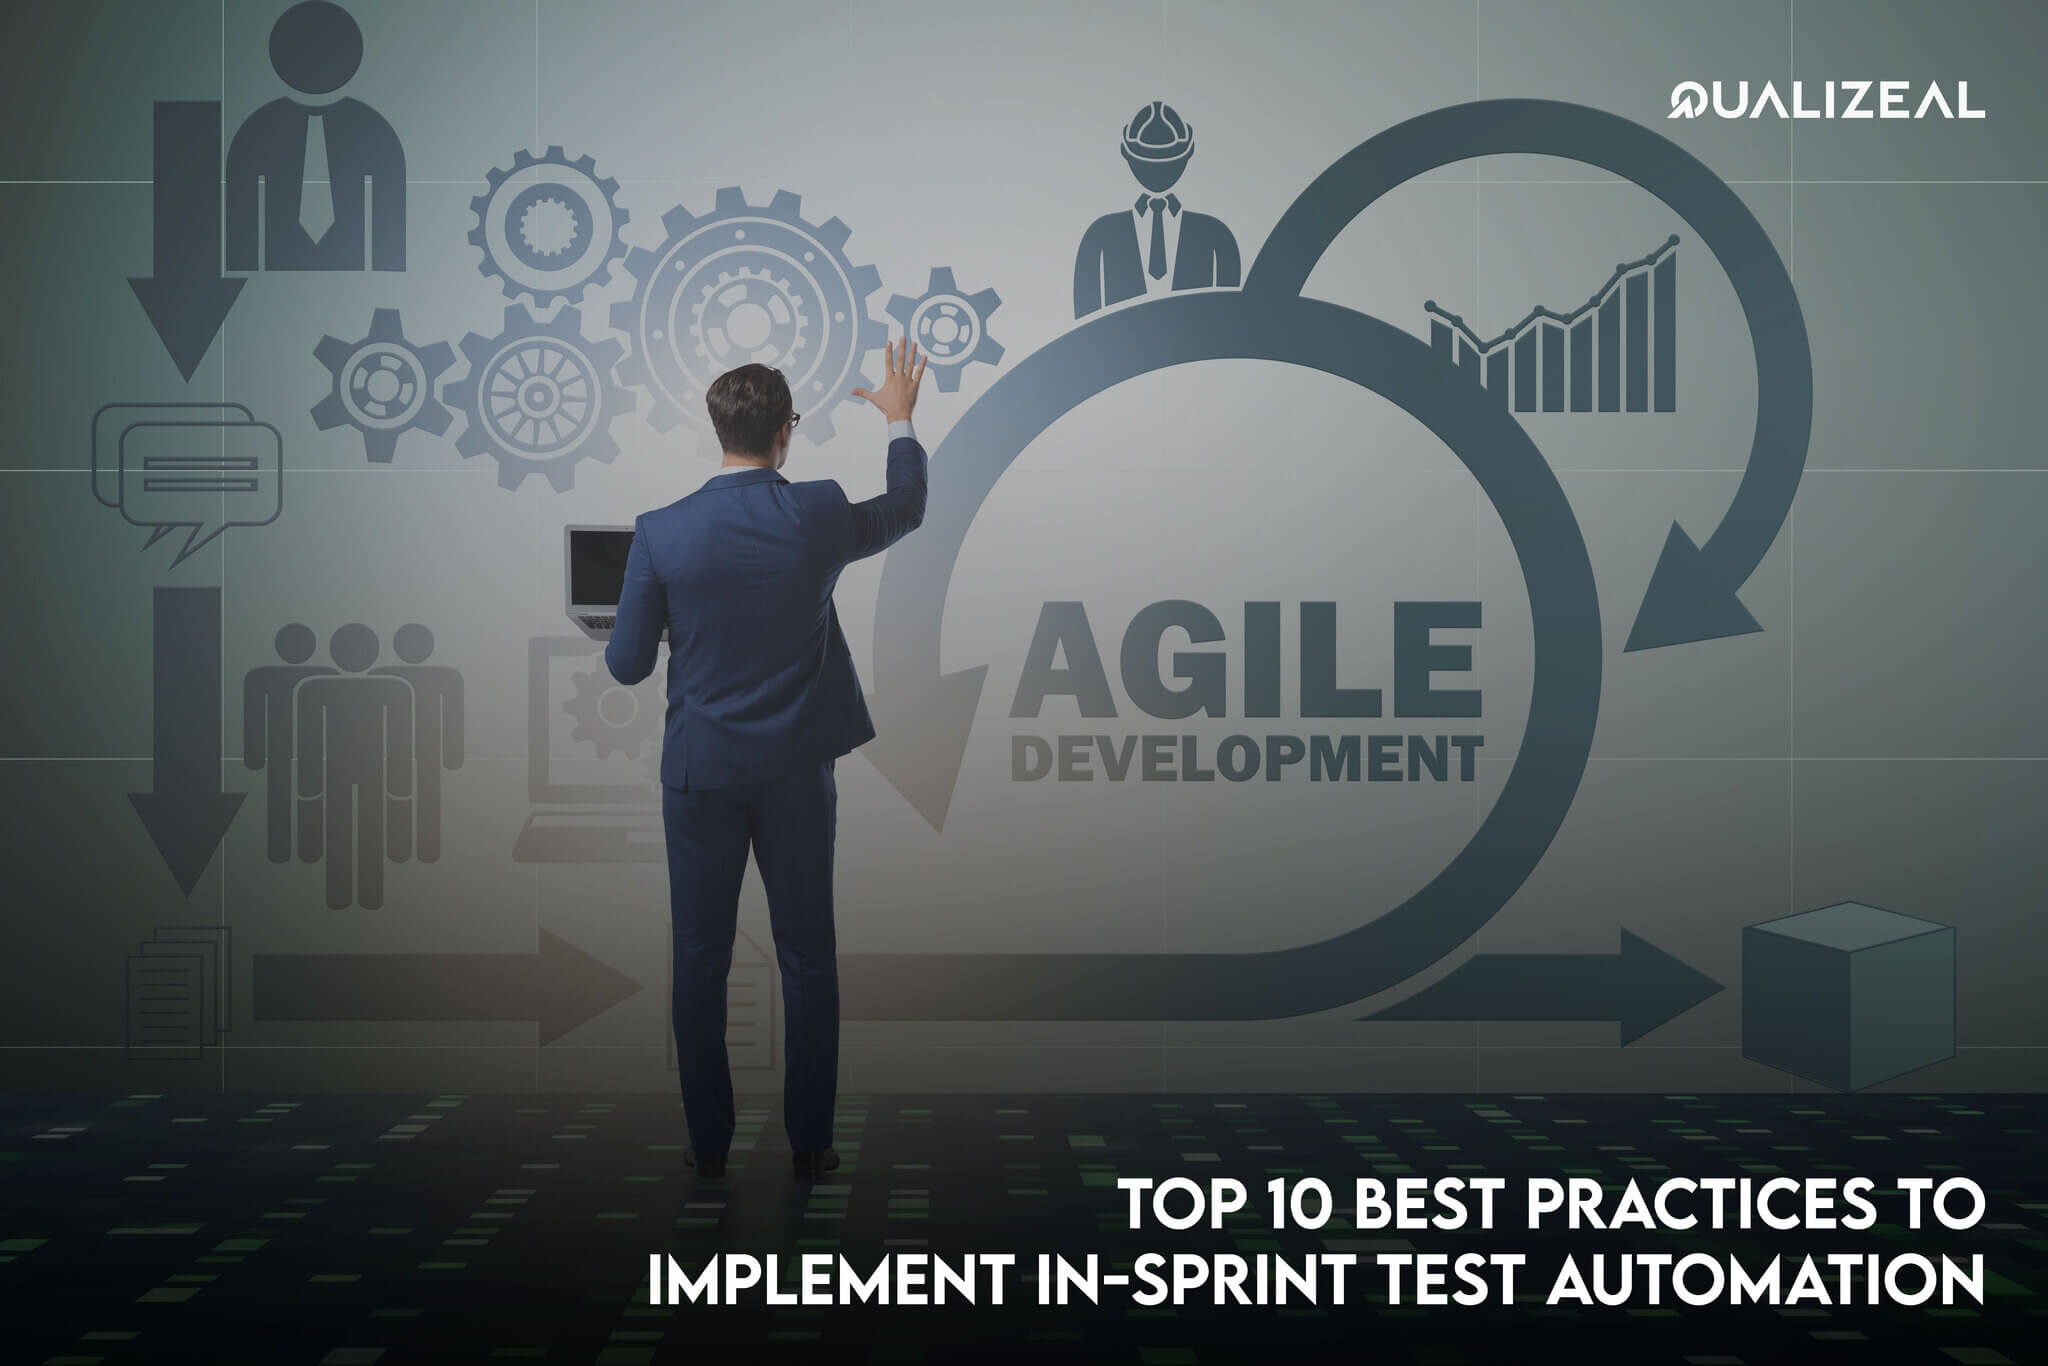 Top 10 best practices to implement in-sprint test automation